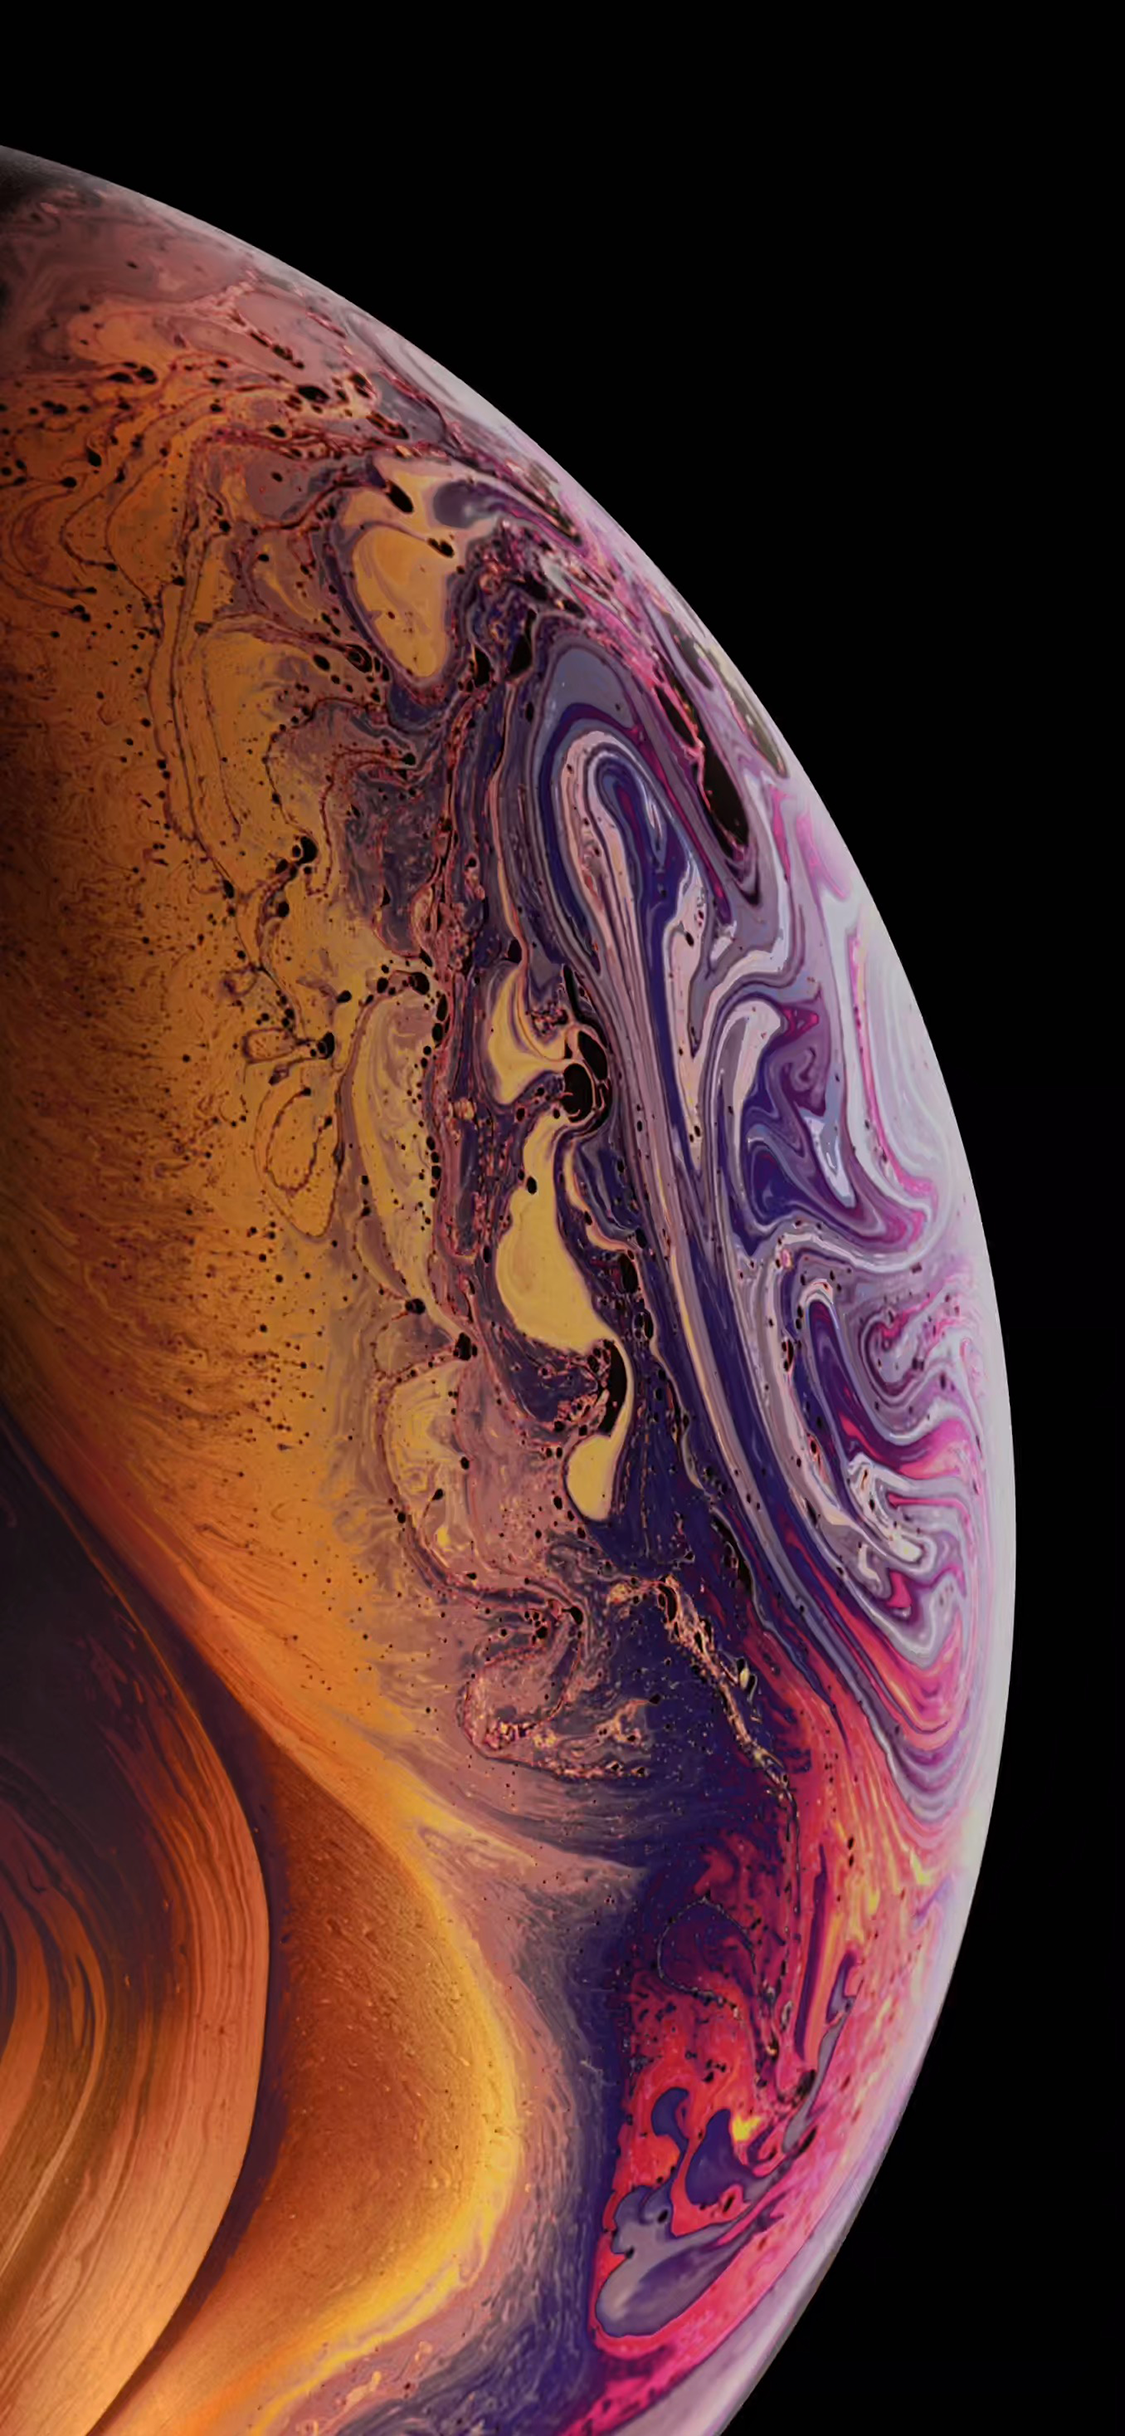 iPhone XS Wallpaper   Gold Event   Wallpapers Central